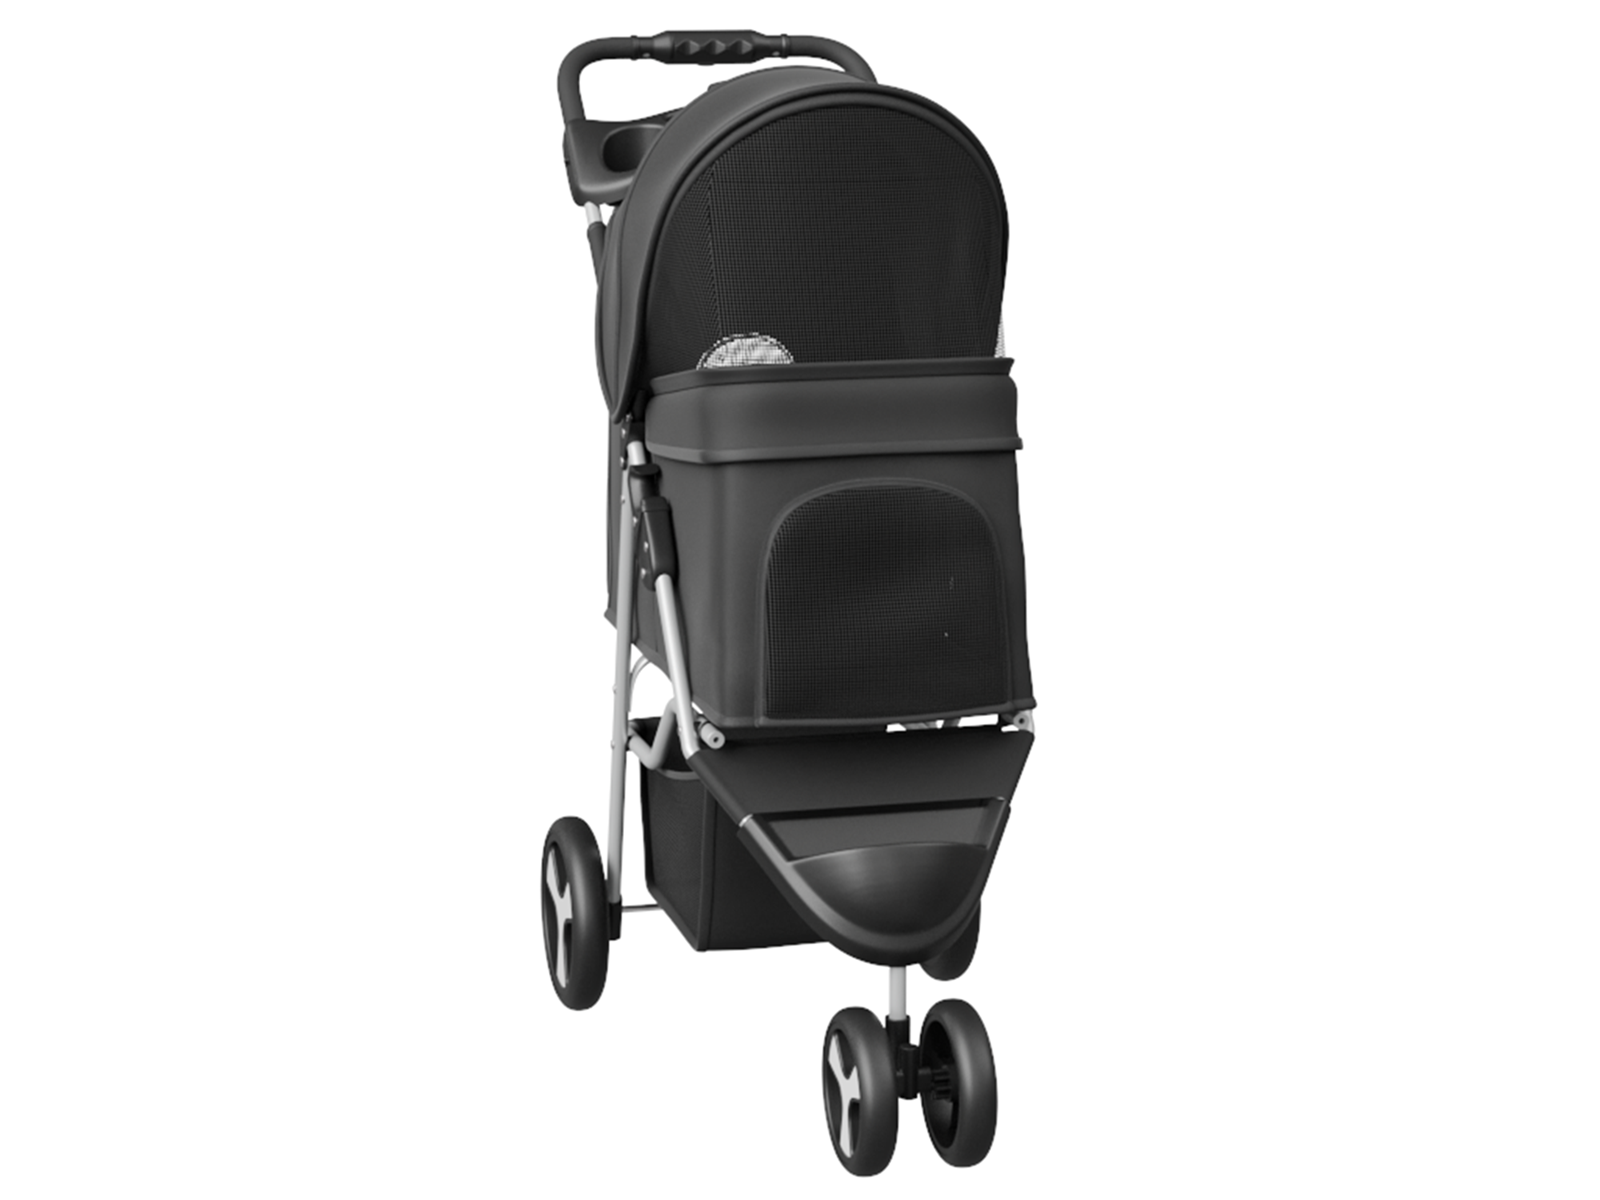 Pet Travel Carriage with Foldable Carrier Cart and Cup Holder, 3-Wheeler, Size: 30.717